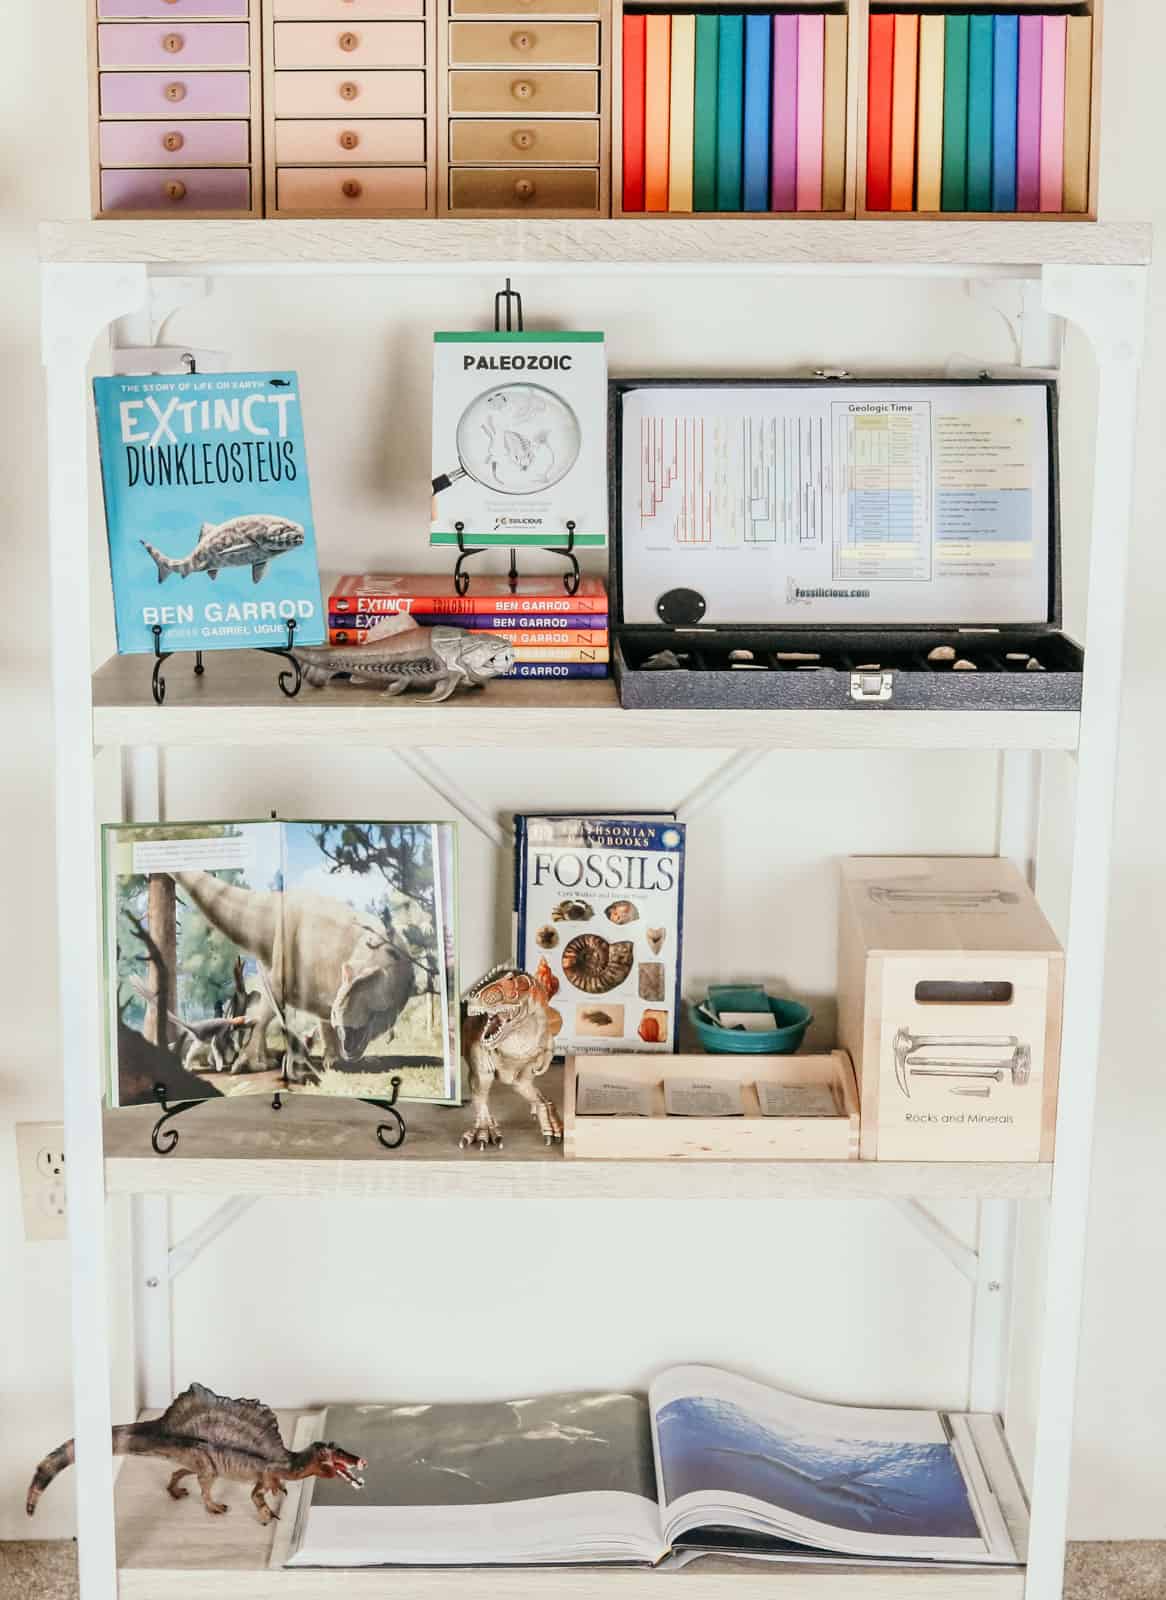 homeschool shelves with books and hands-on materials for exploring the history of earth